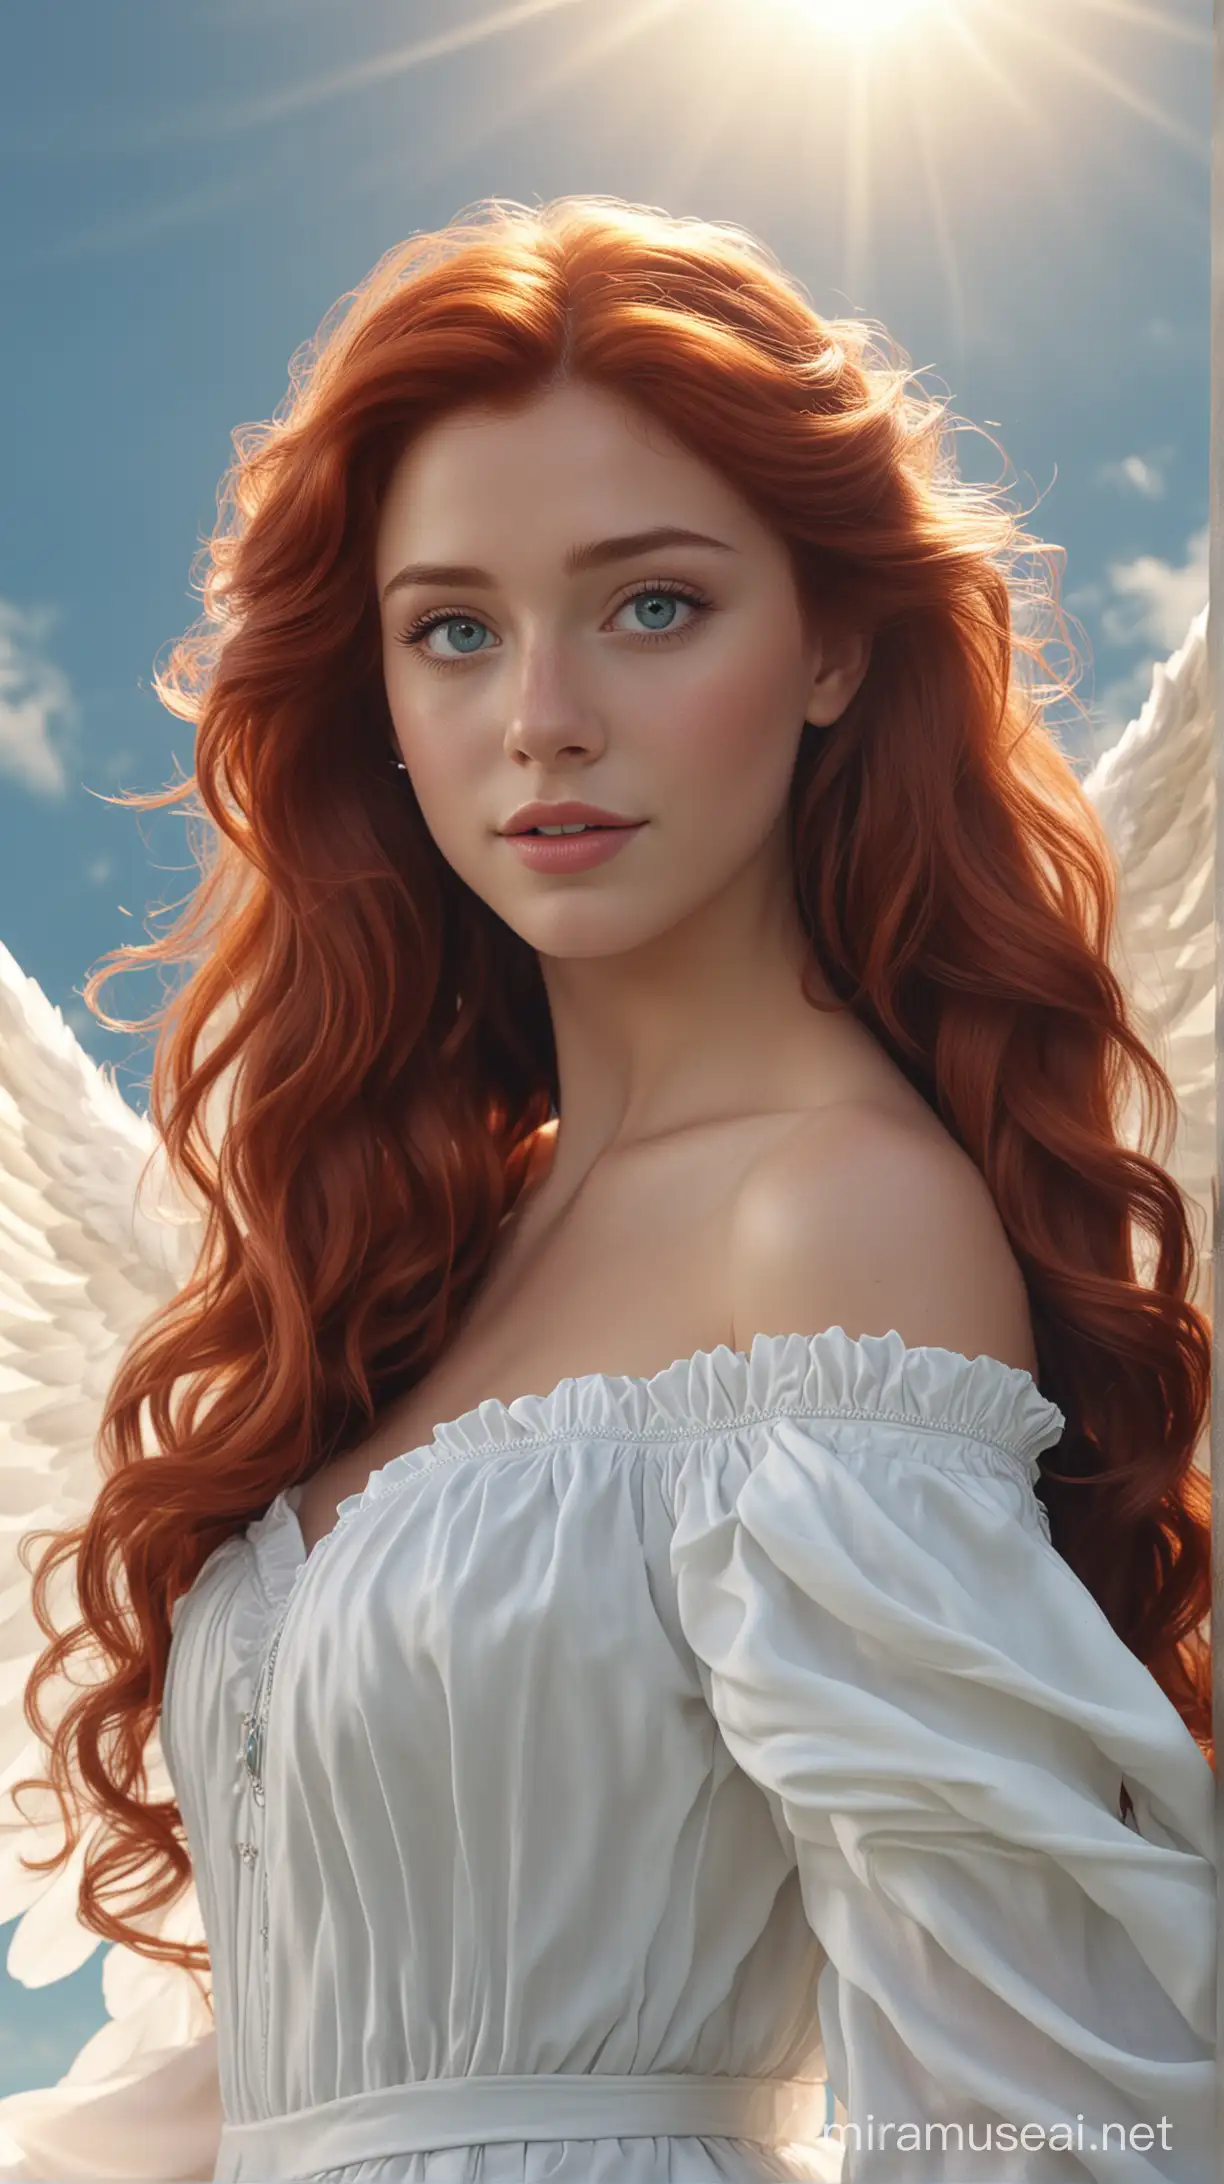 in the sky natural background  there are disney princess Ariel  Danish 18-years and long wavy red hair and blue eyes and celestial white dress and with large white angel wings face beautiful 8k re solution ultra-realistic